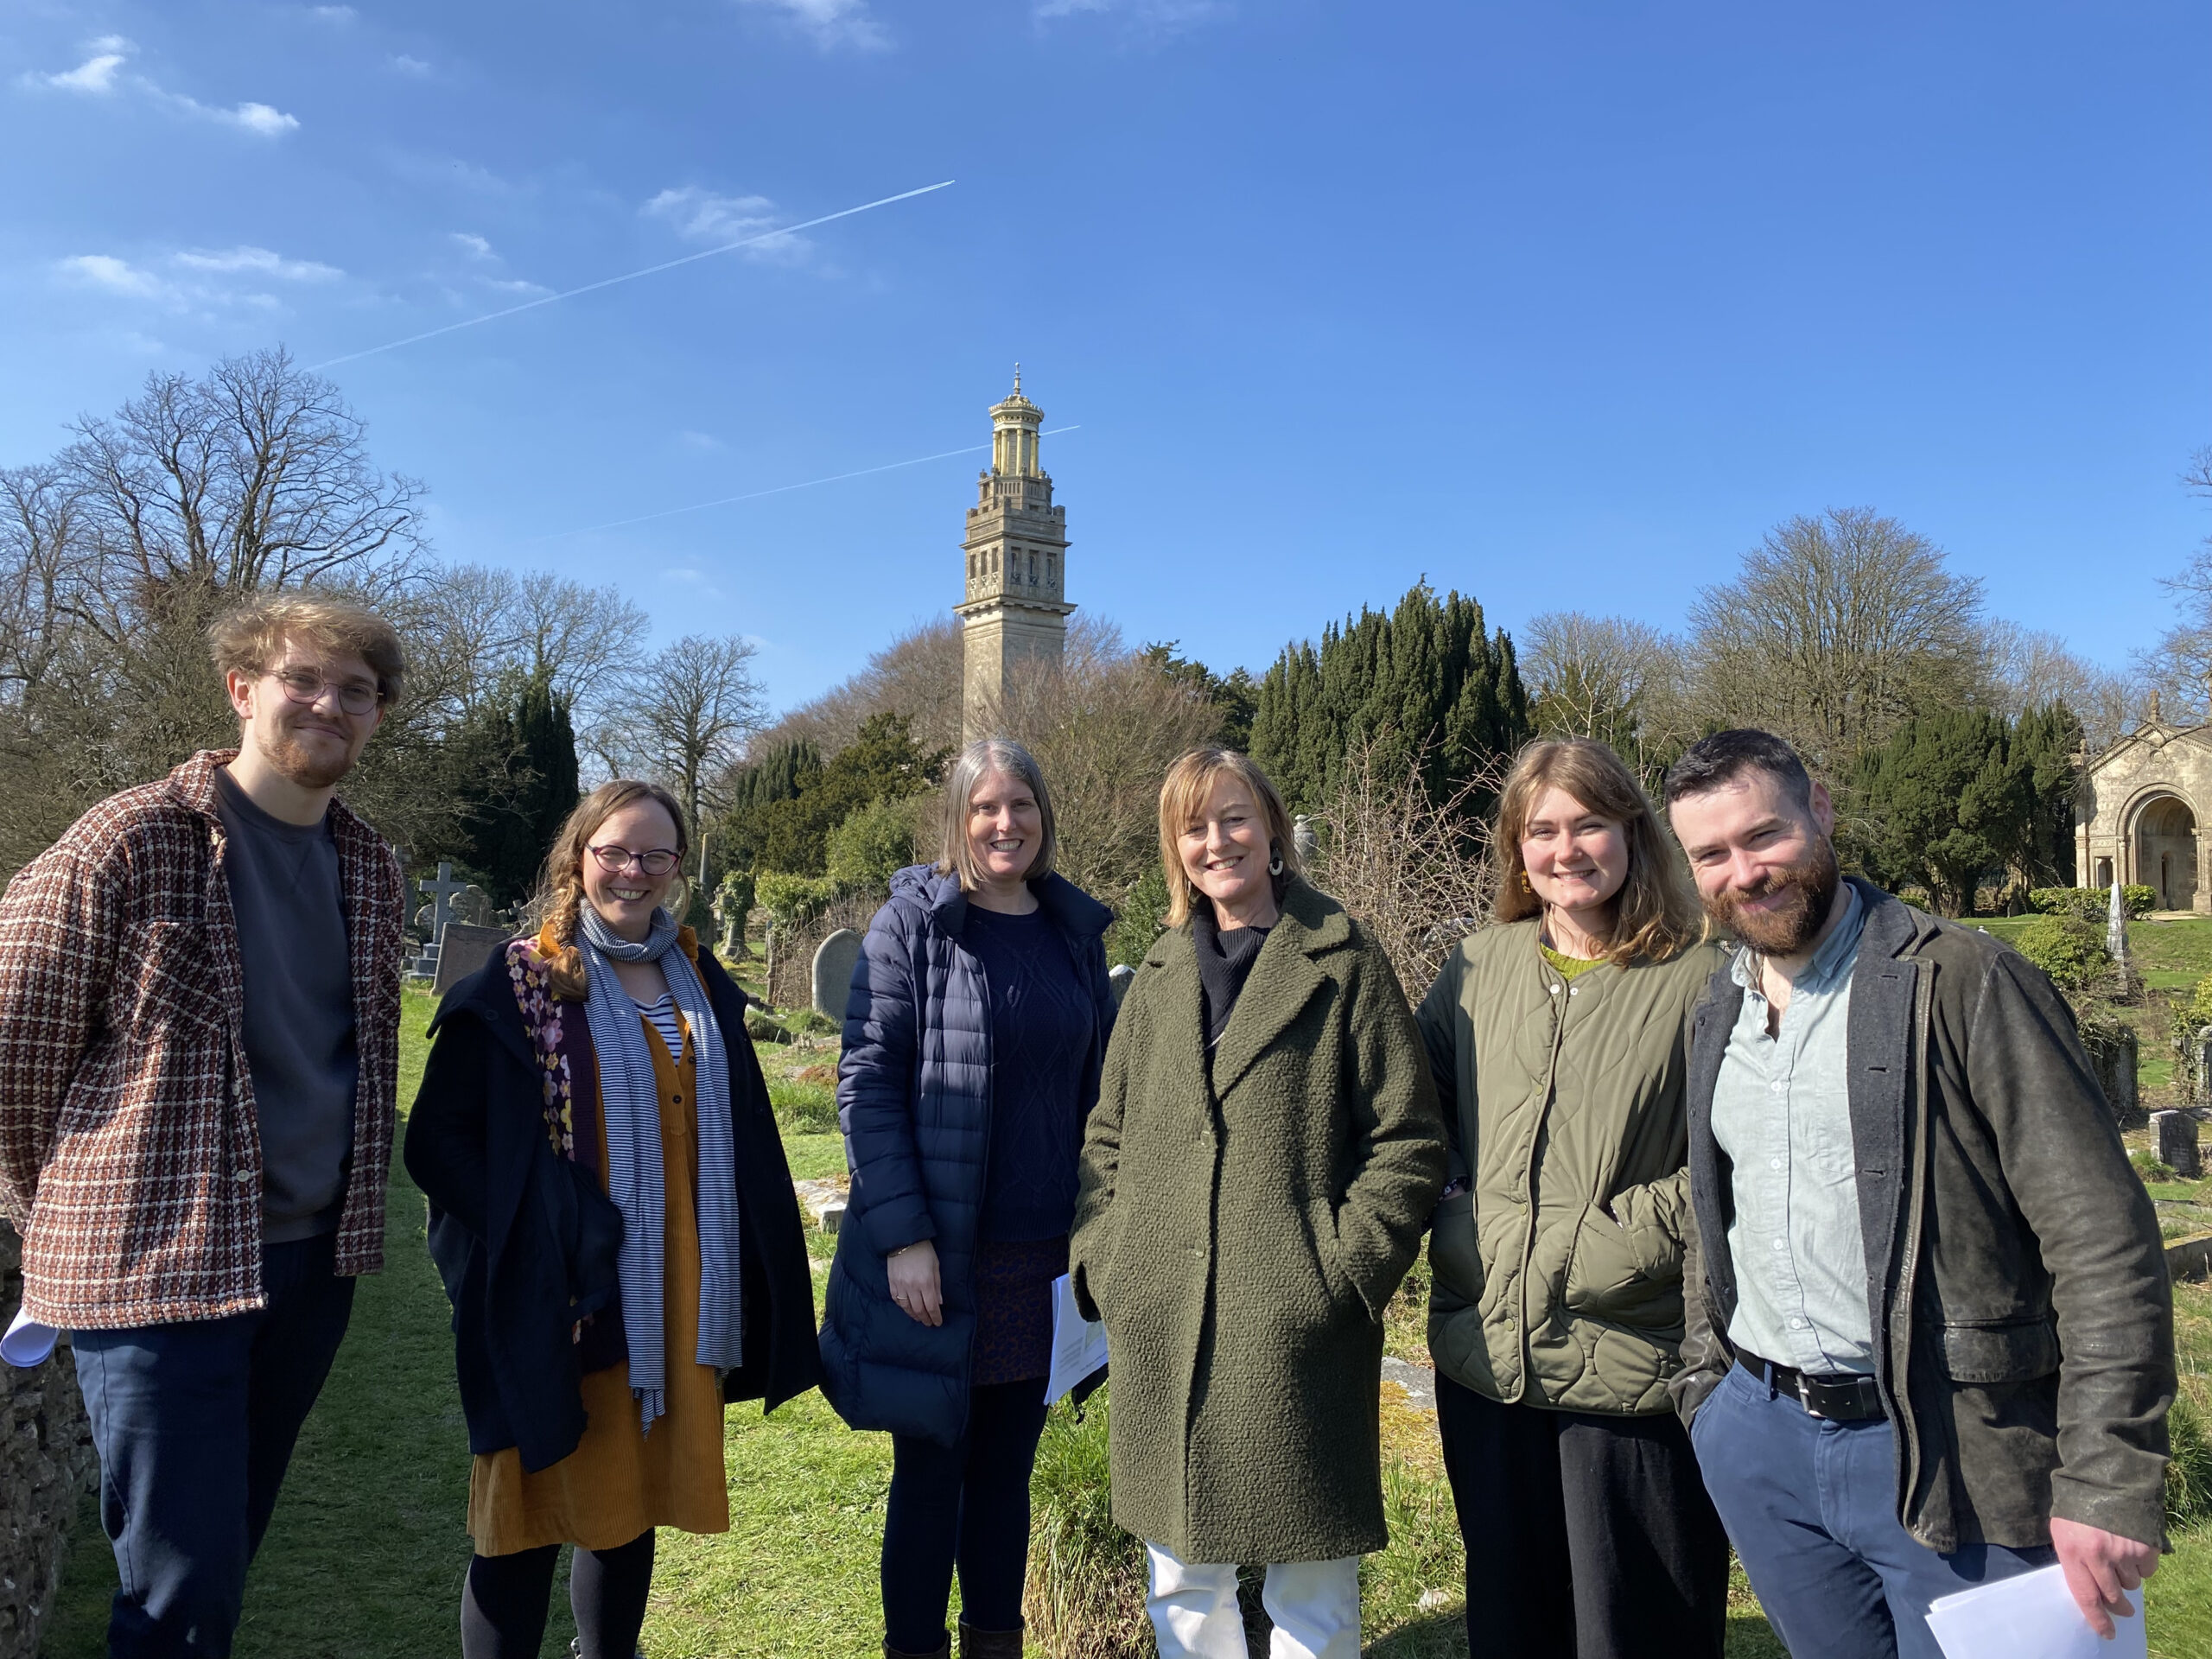 Zubr Curio and team at Beckford's Tower